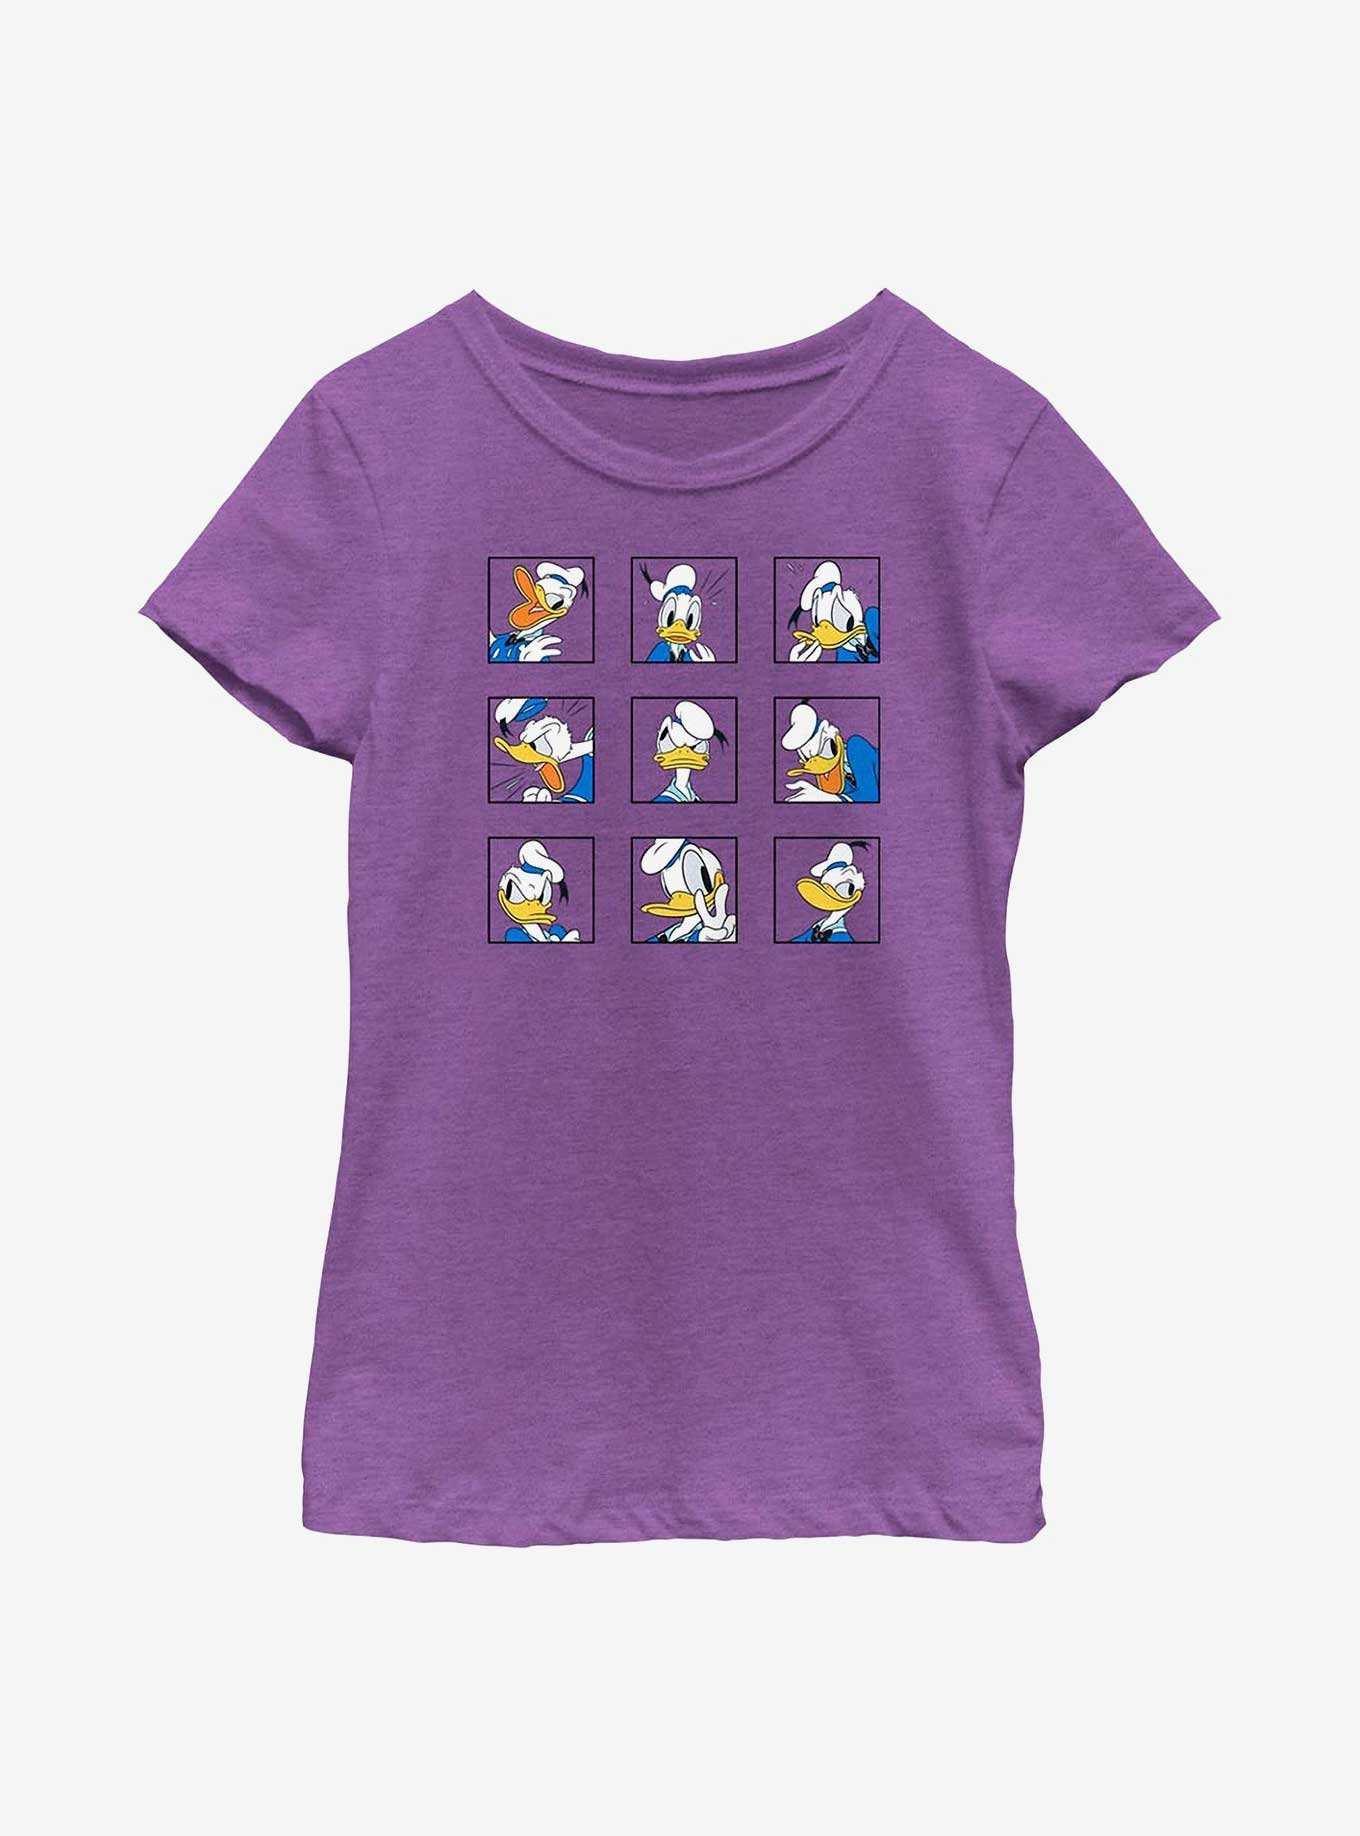 Disney Donald Duck Grid Expressions Youth Girls T-Shirt, , hi-res